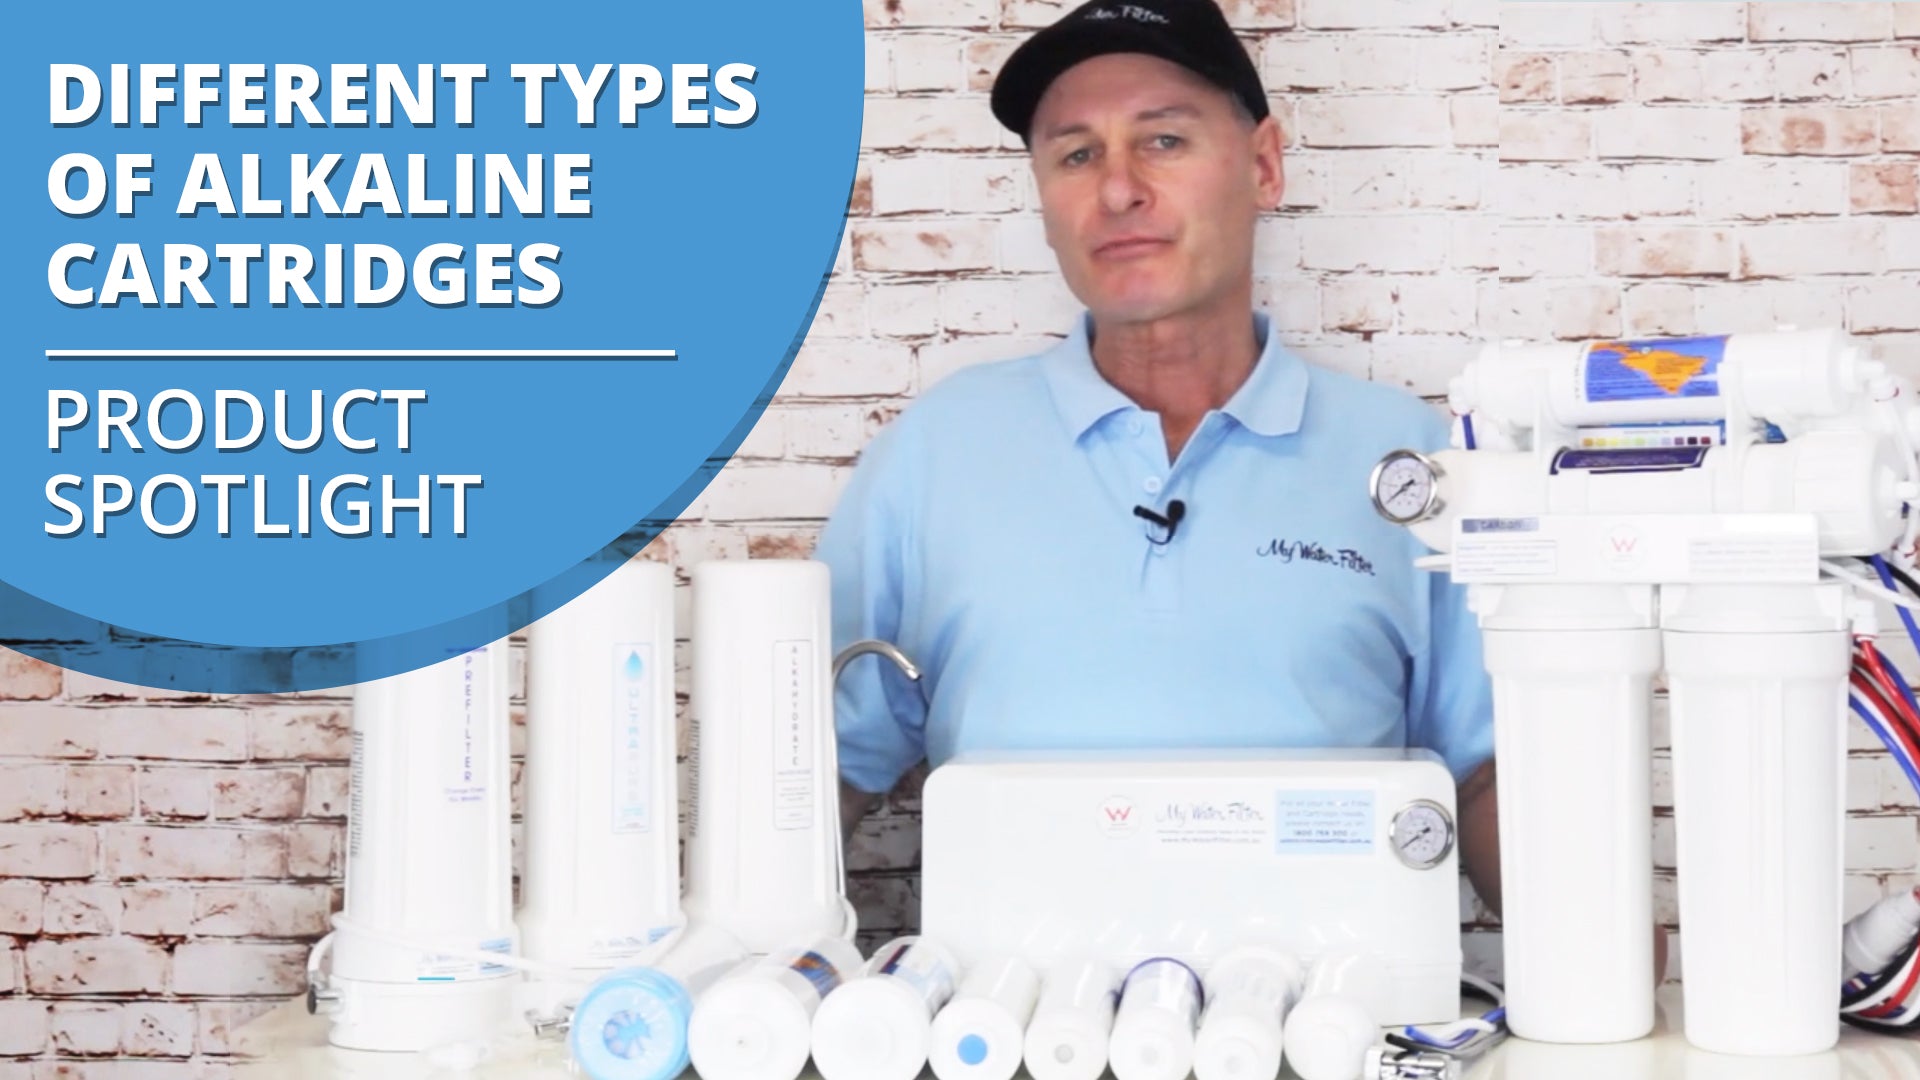 Different Types of Alkaline Cartridges - Product Spotlight